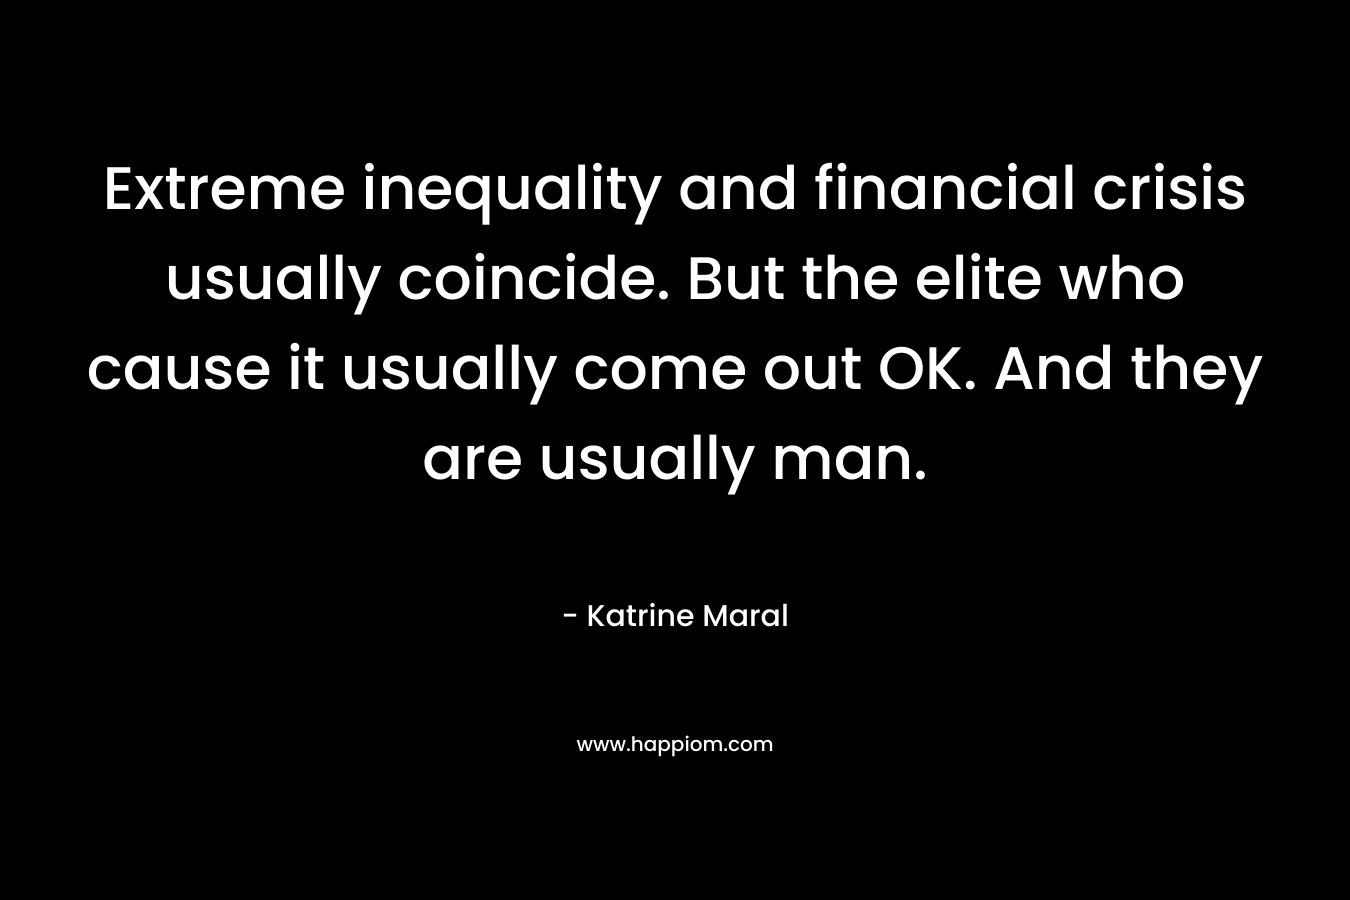 Extreme inequality and financial crisis usually coincide. But the elite who cause it usually come out OK. And they are usually man.